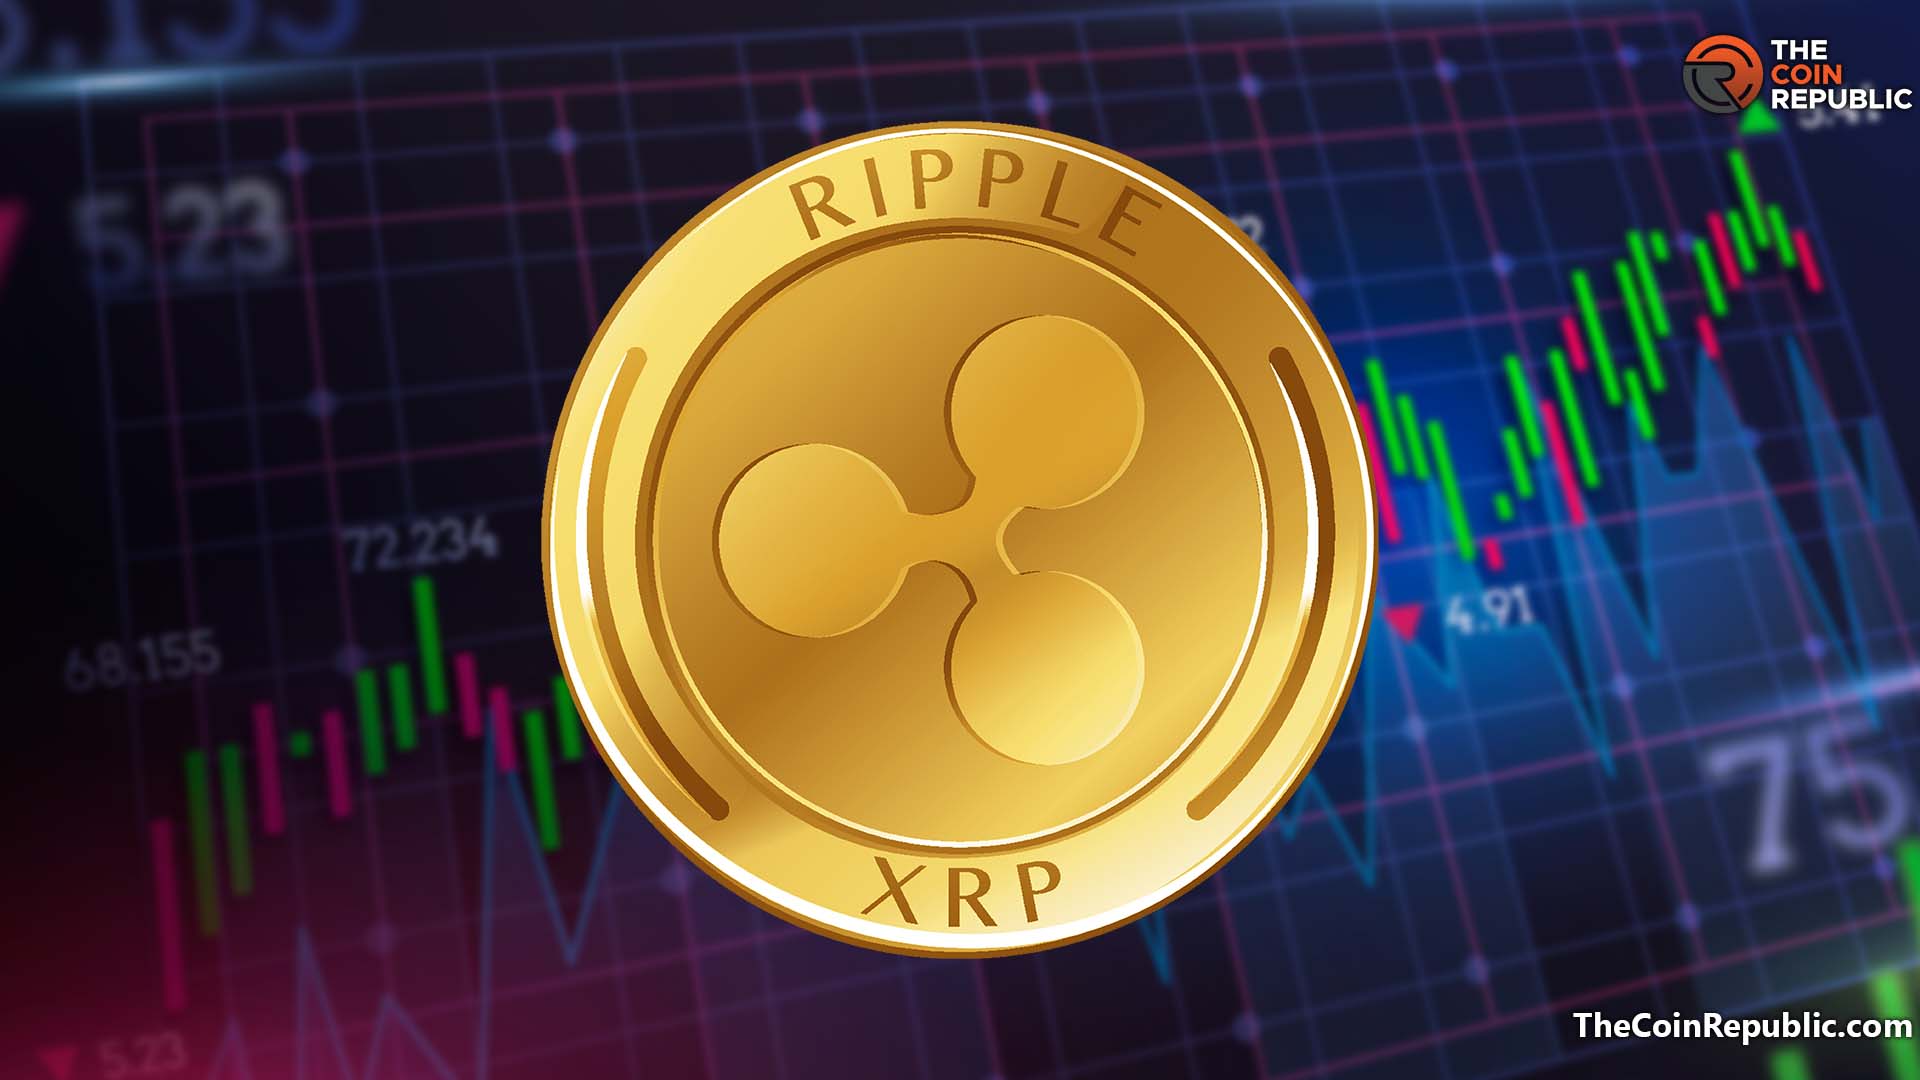 Ripple Announced its ODL Growth in 2022